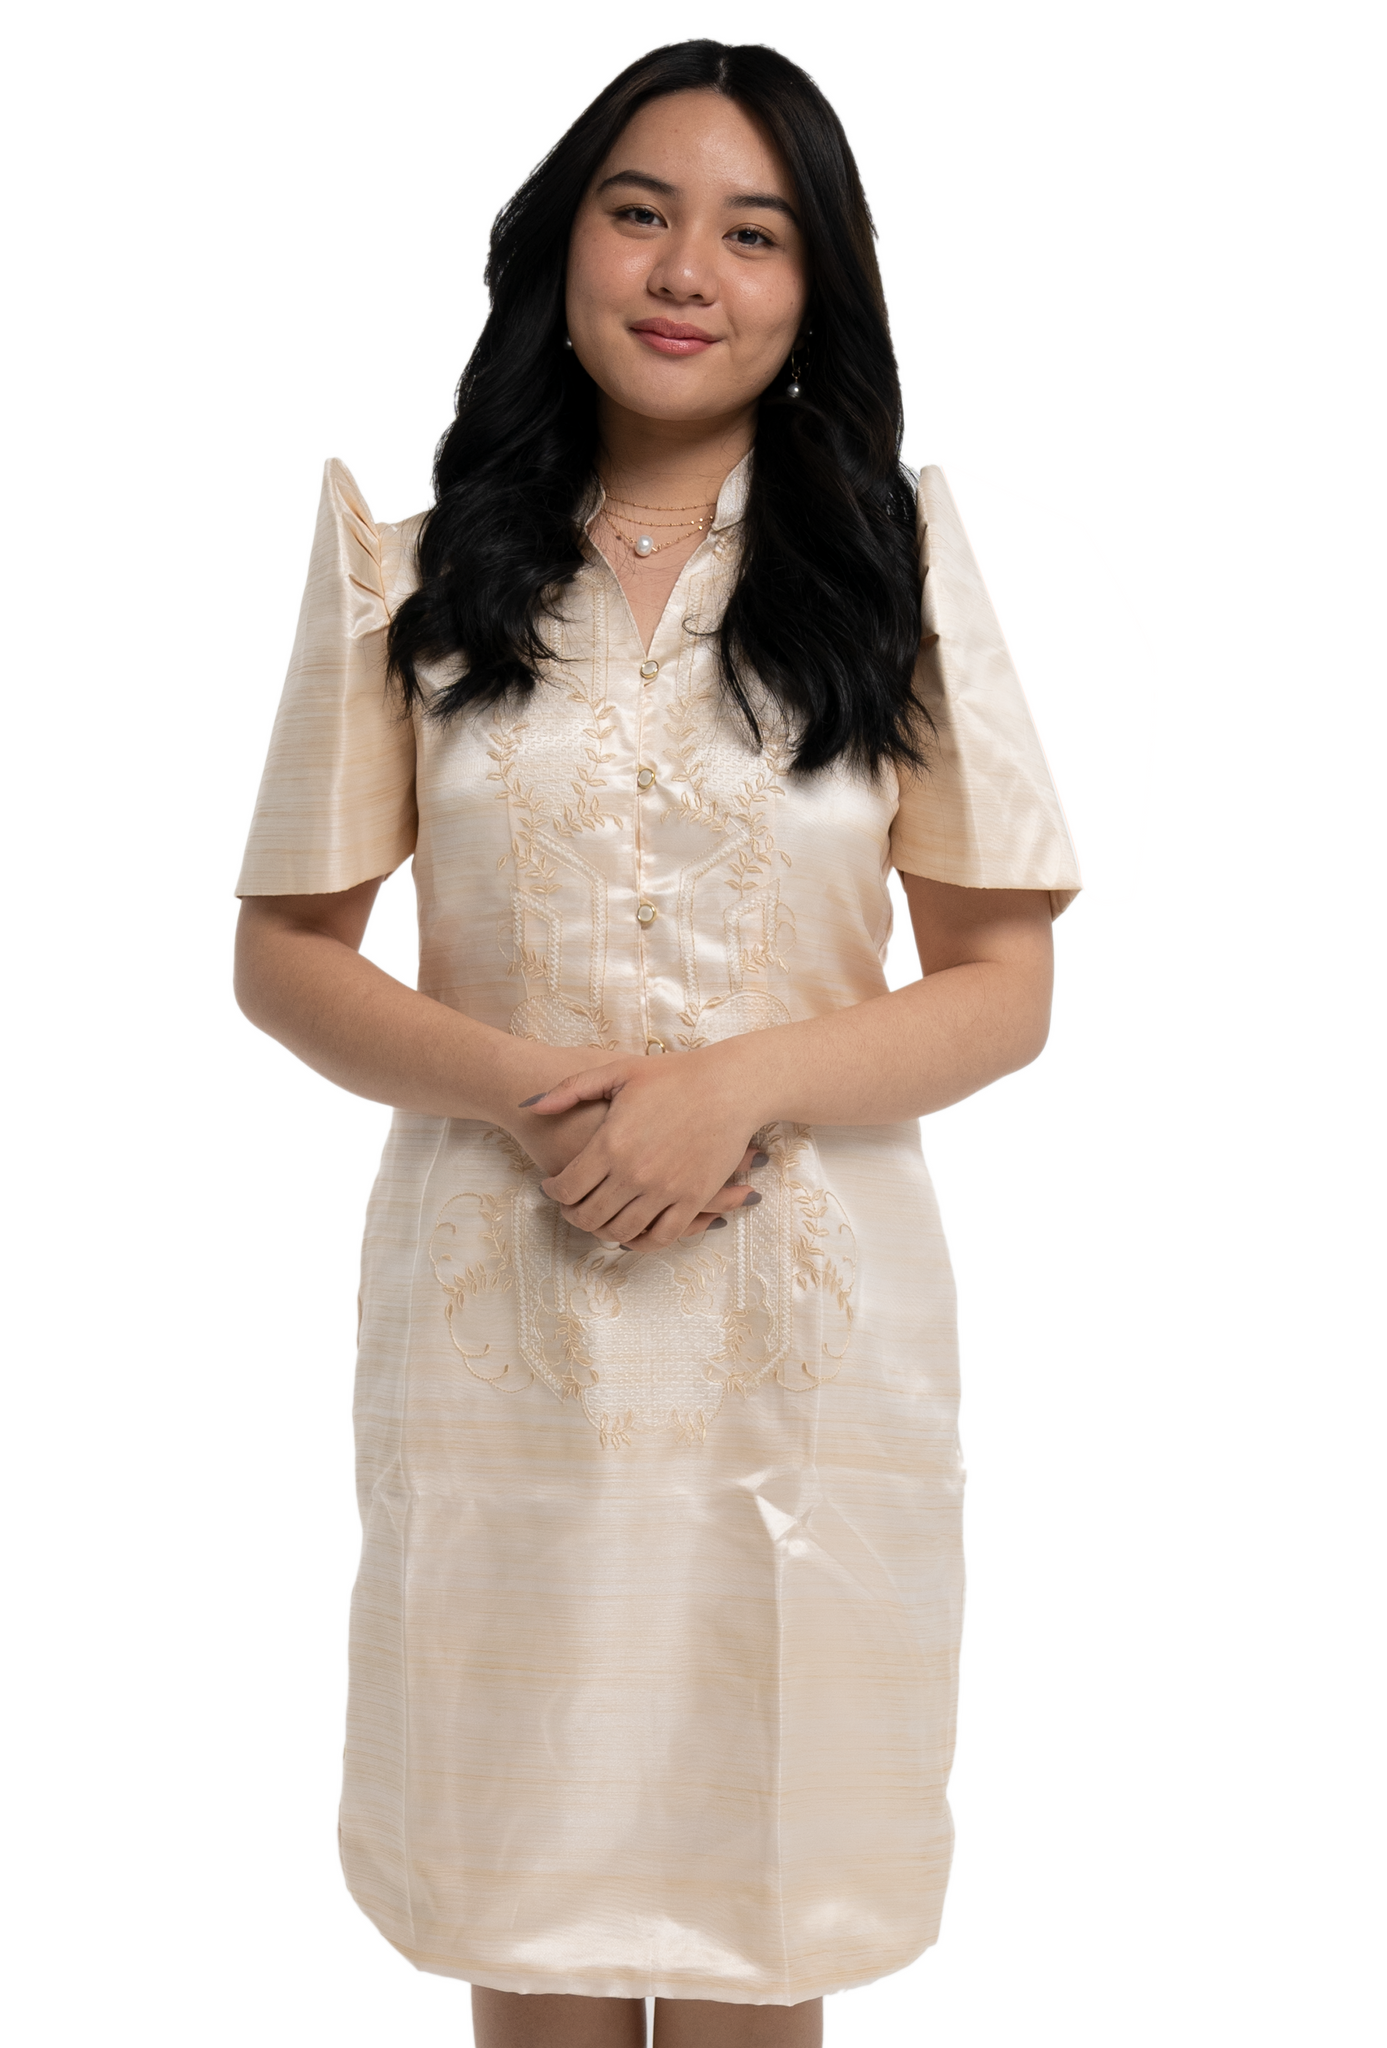 Filipiniana Dress & Gowns Up to 50% OFF Year End Sale – Barong World